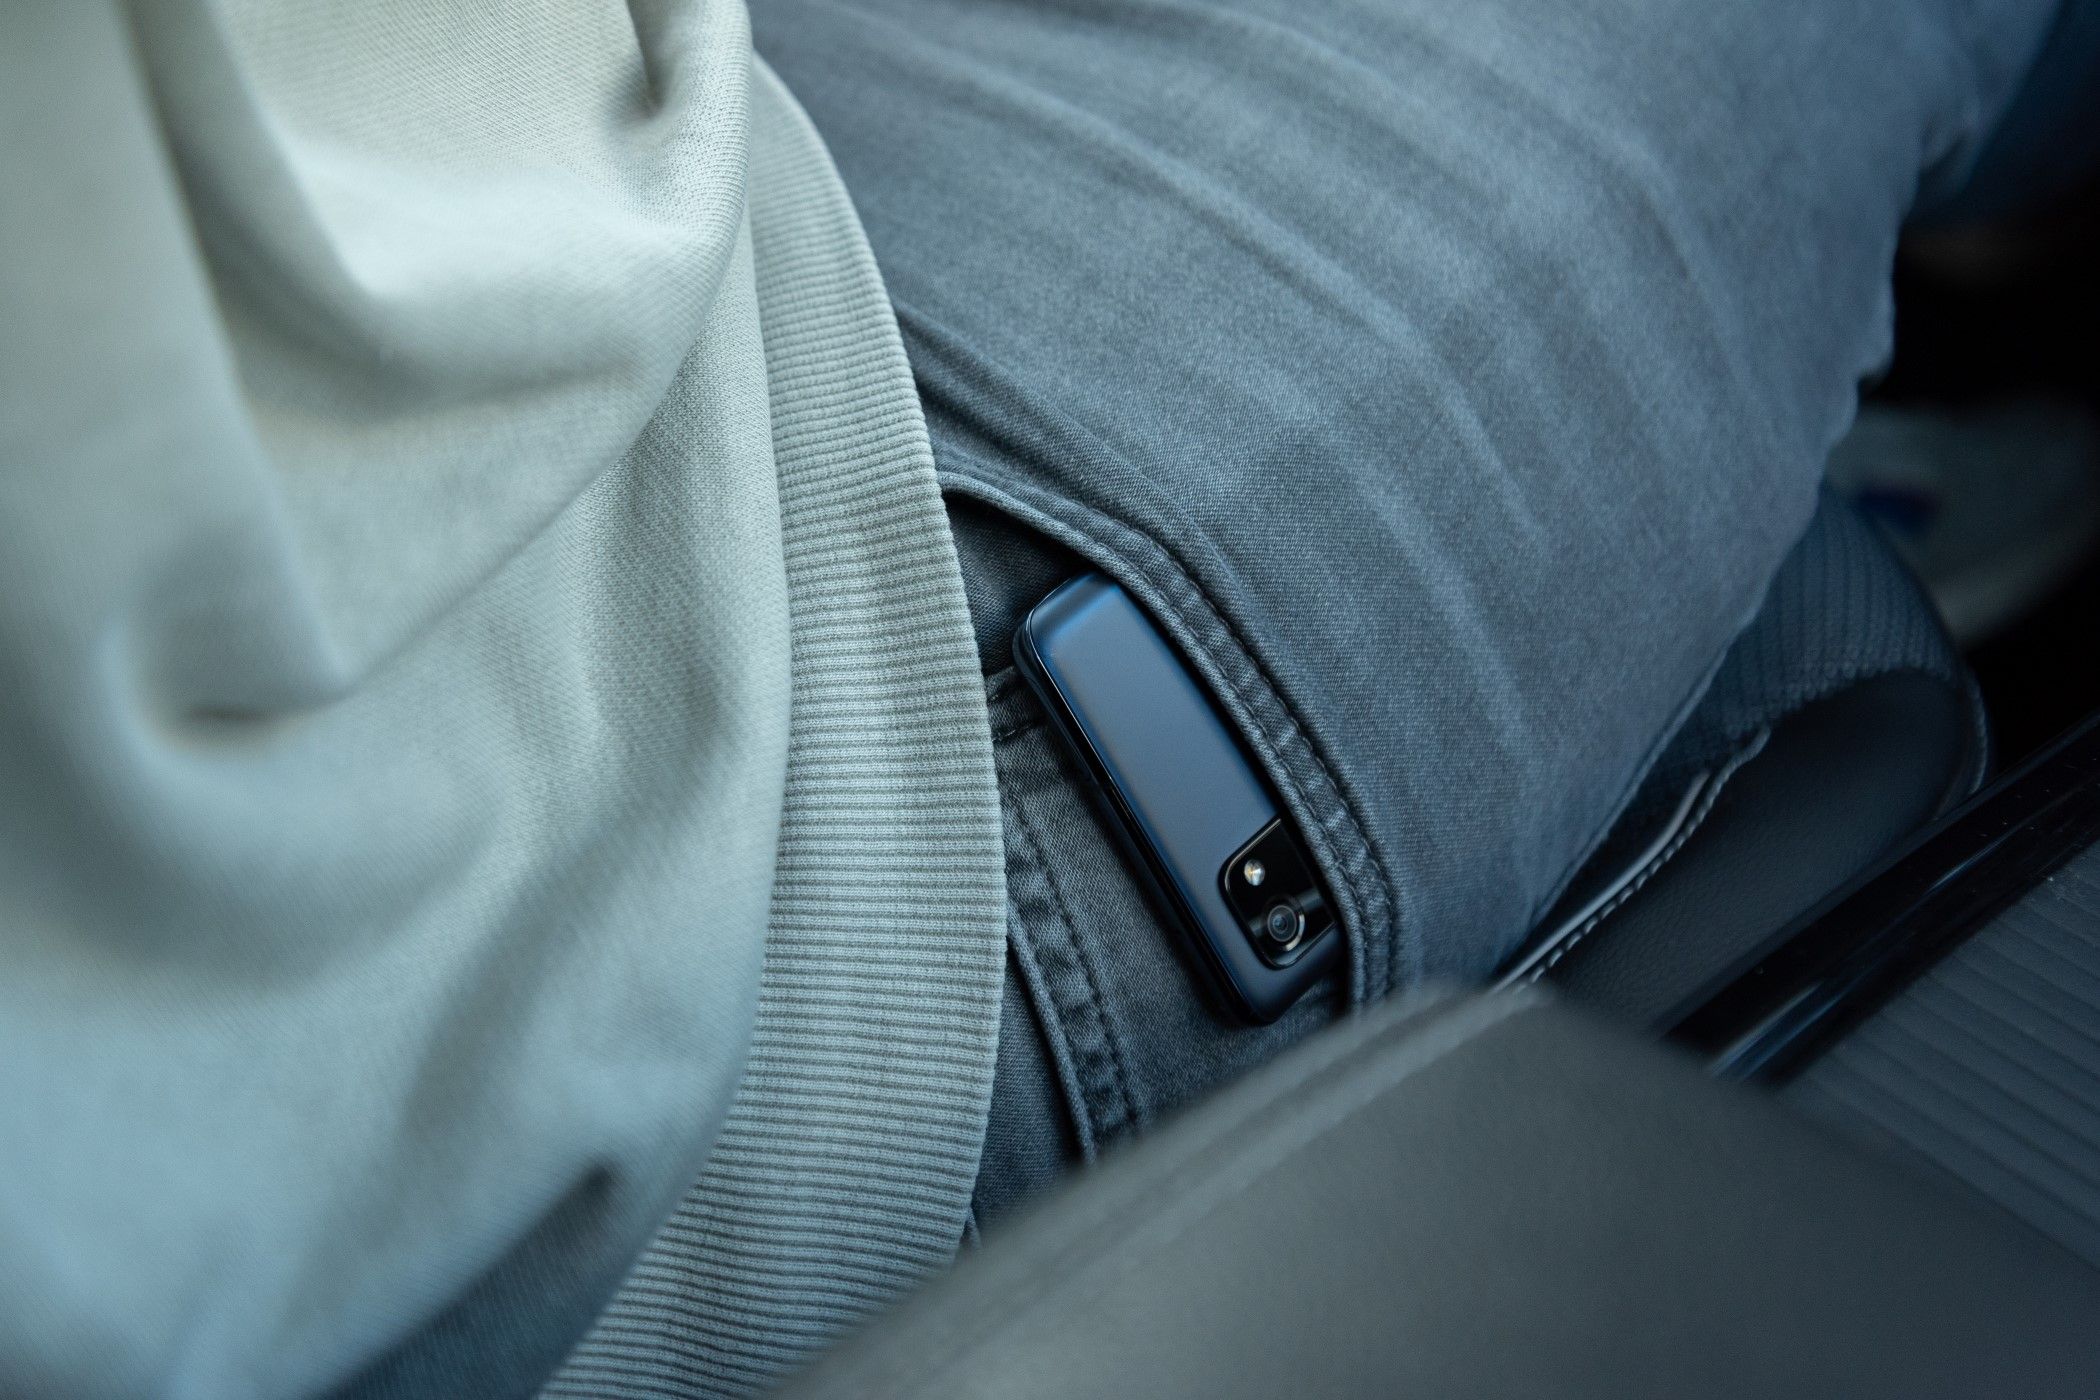 A man driving with his phone kept in his jeans pocket